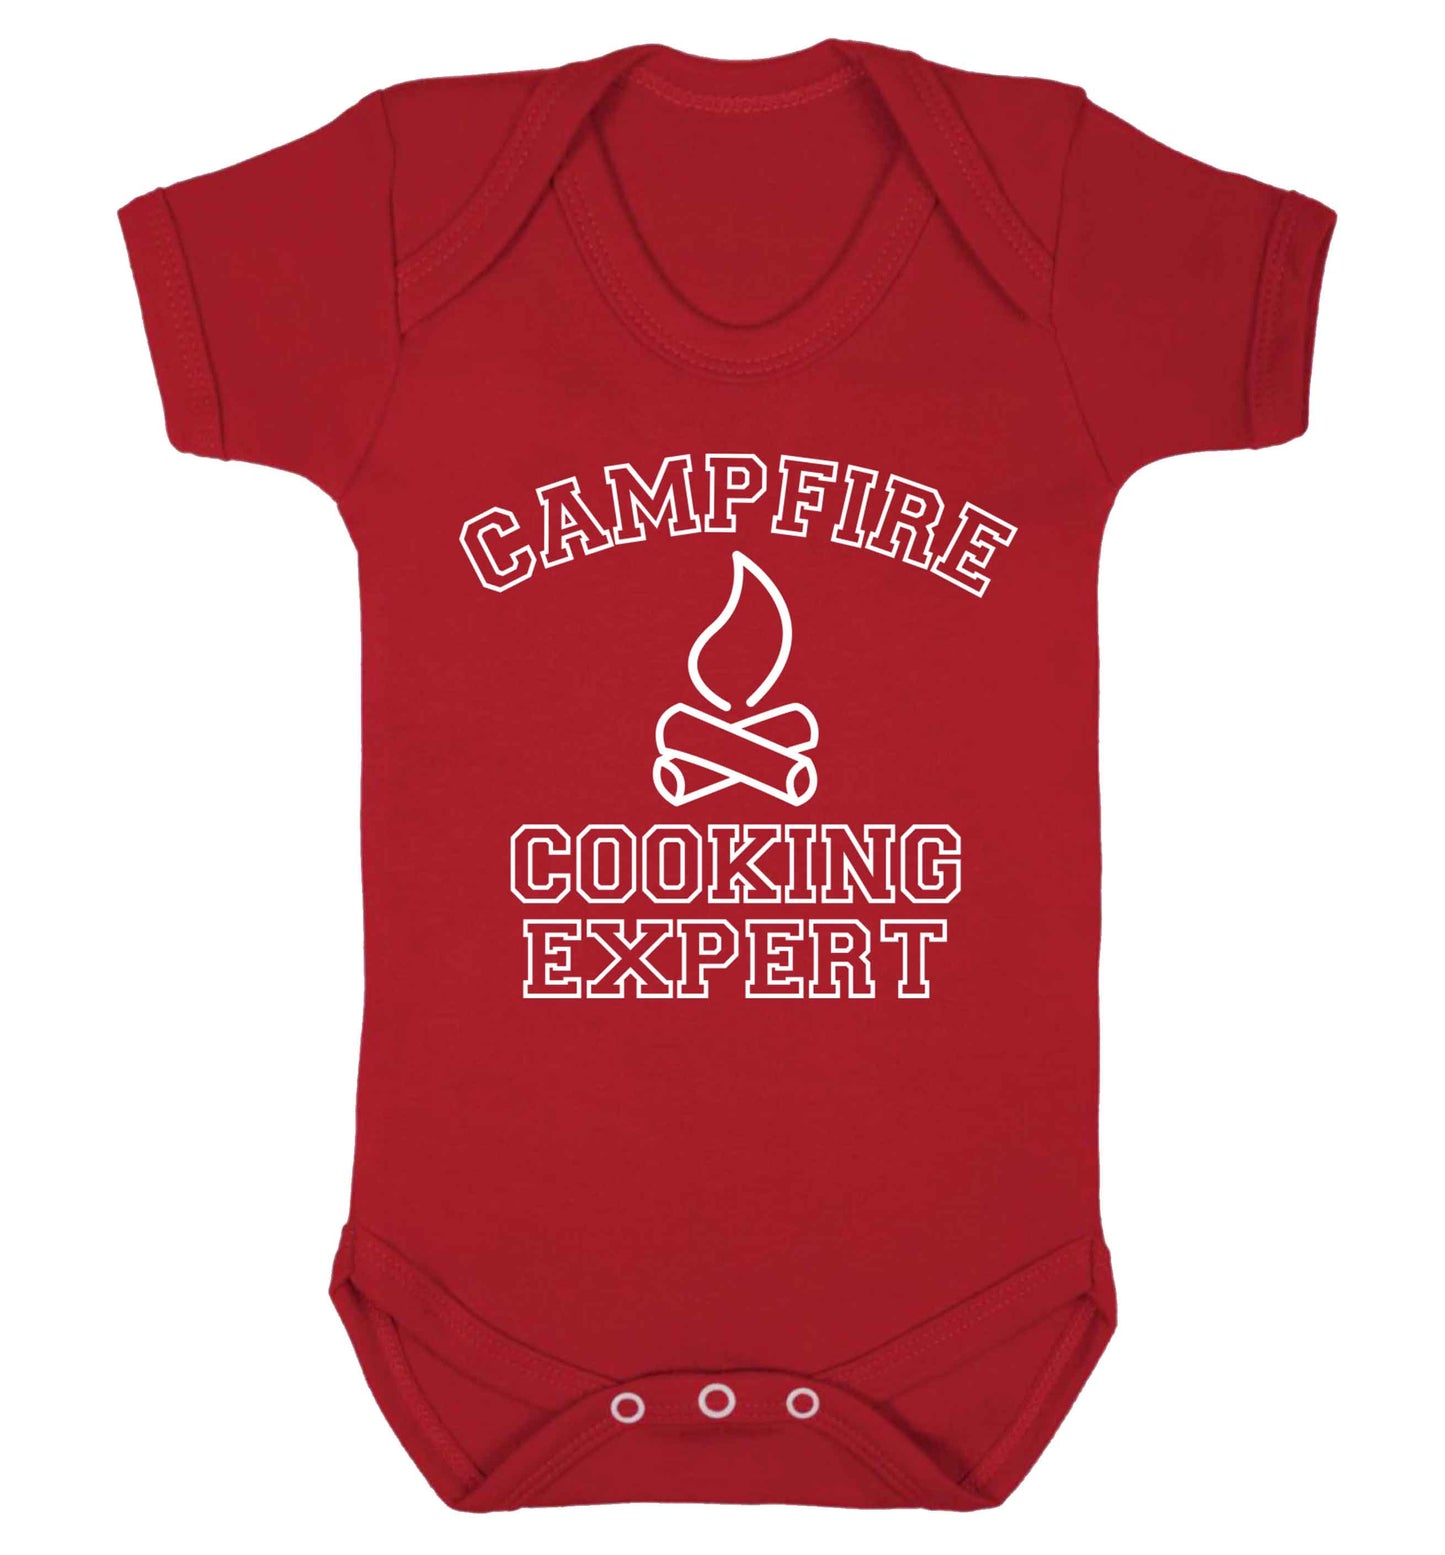 Campfire cooking expert Baby Vest red 18-24 months